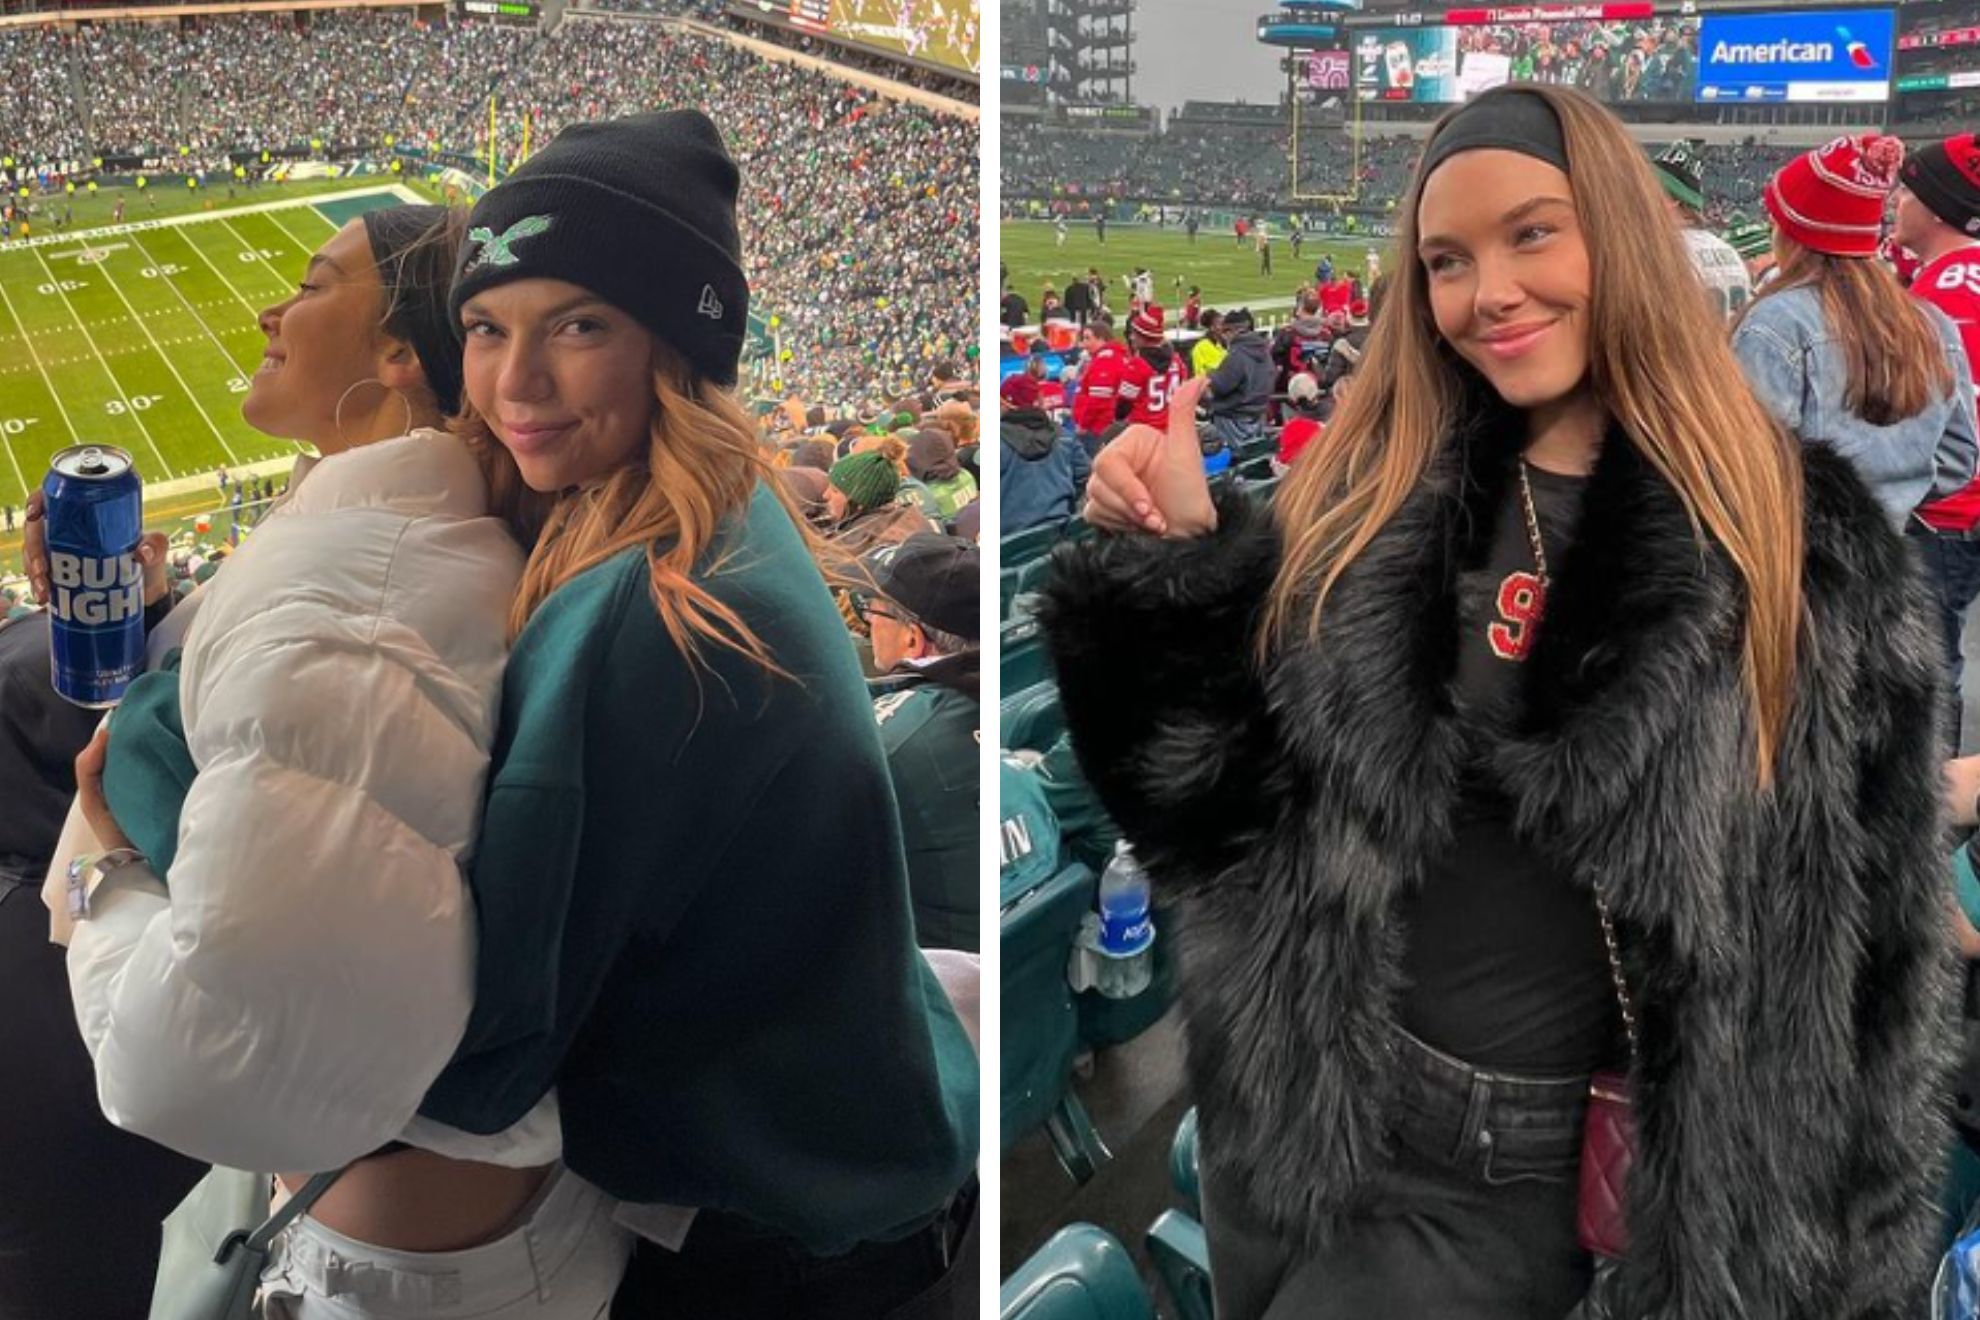 Nick Bosa makes his new girlfriend stop rooting for Eagles to support 49ers